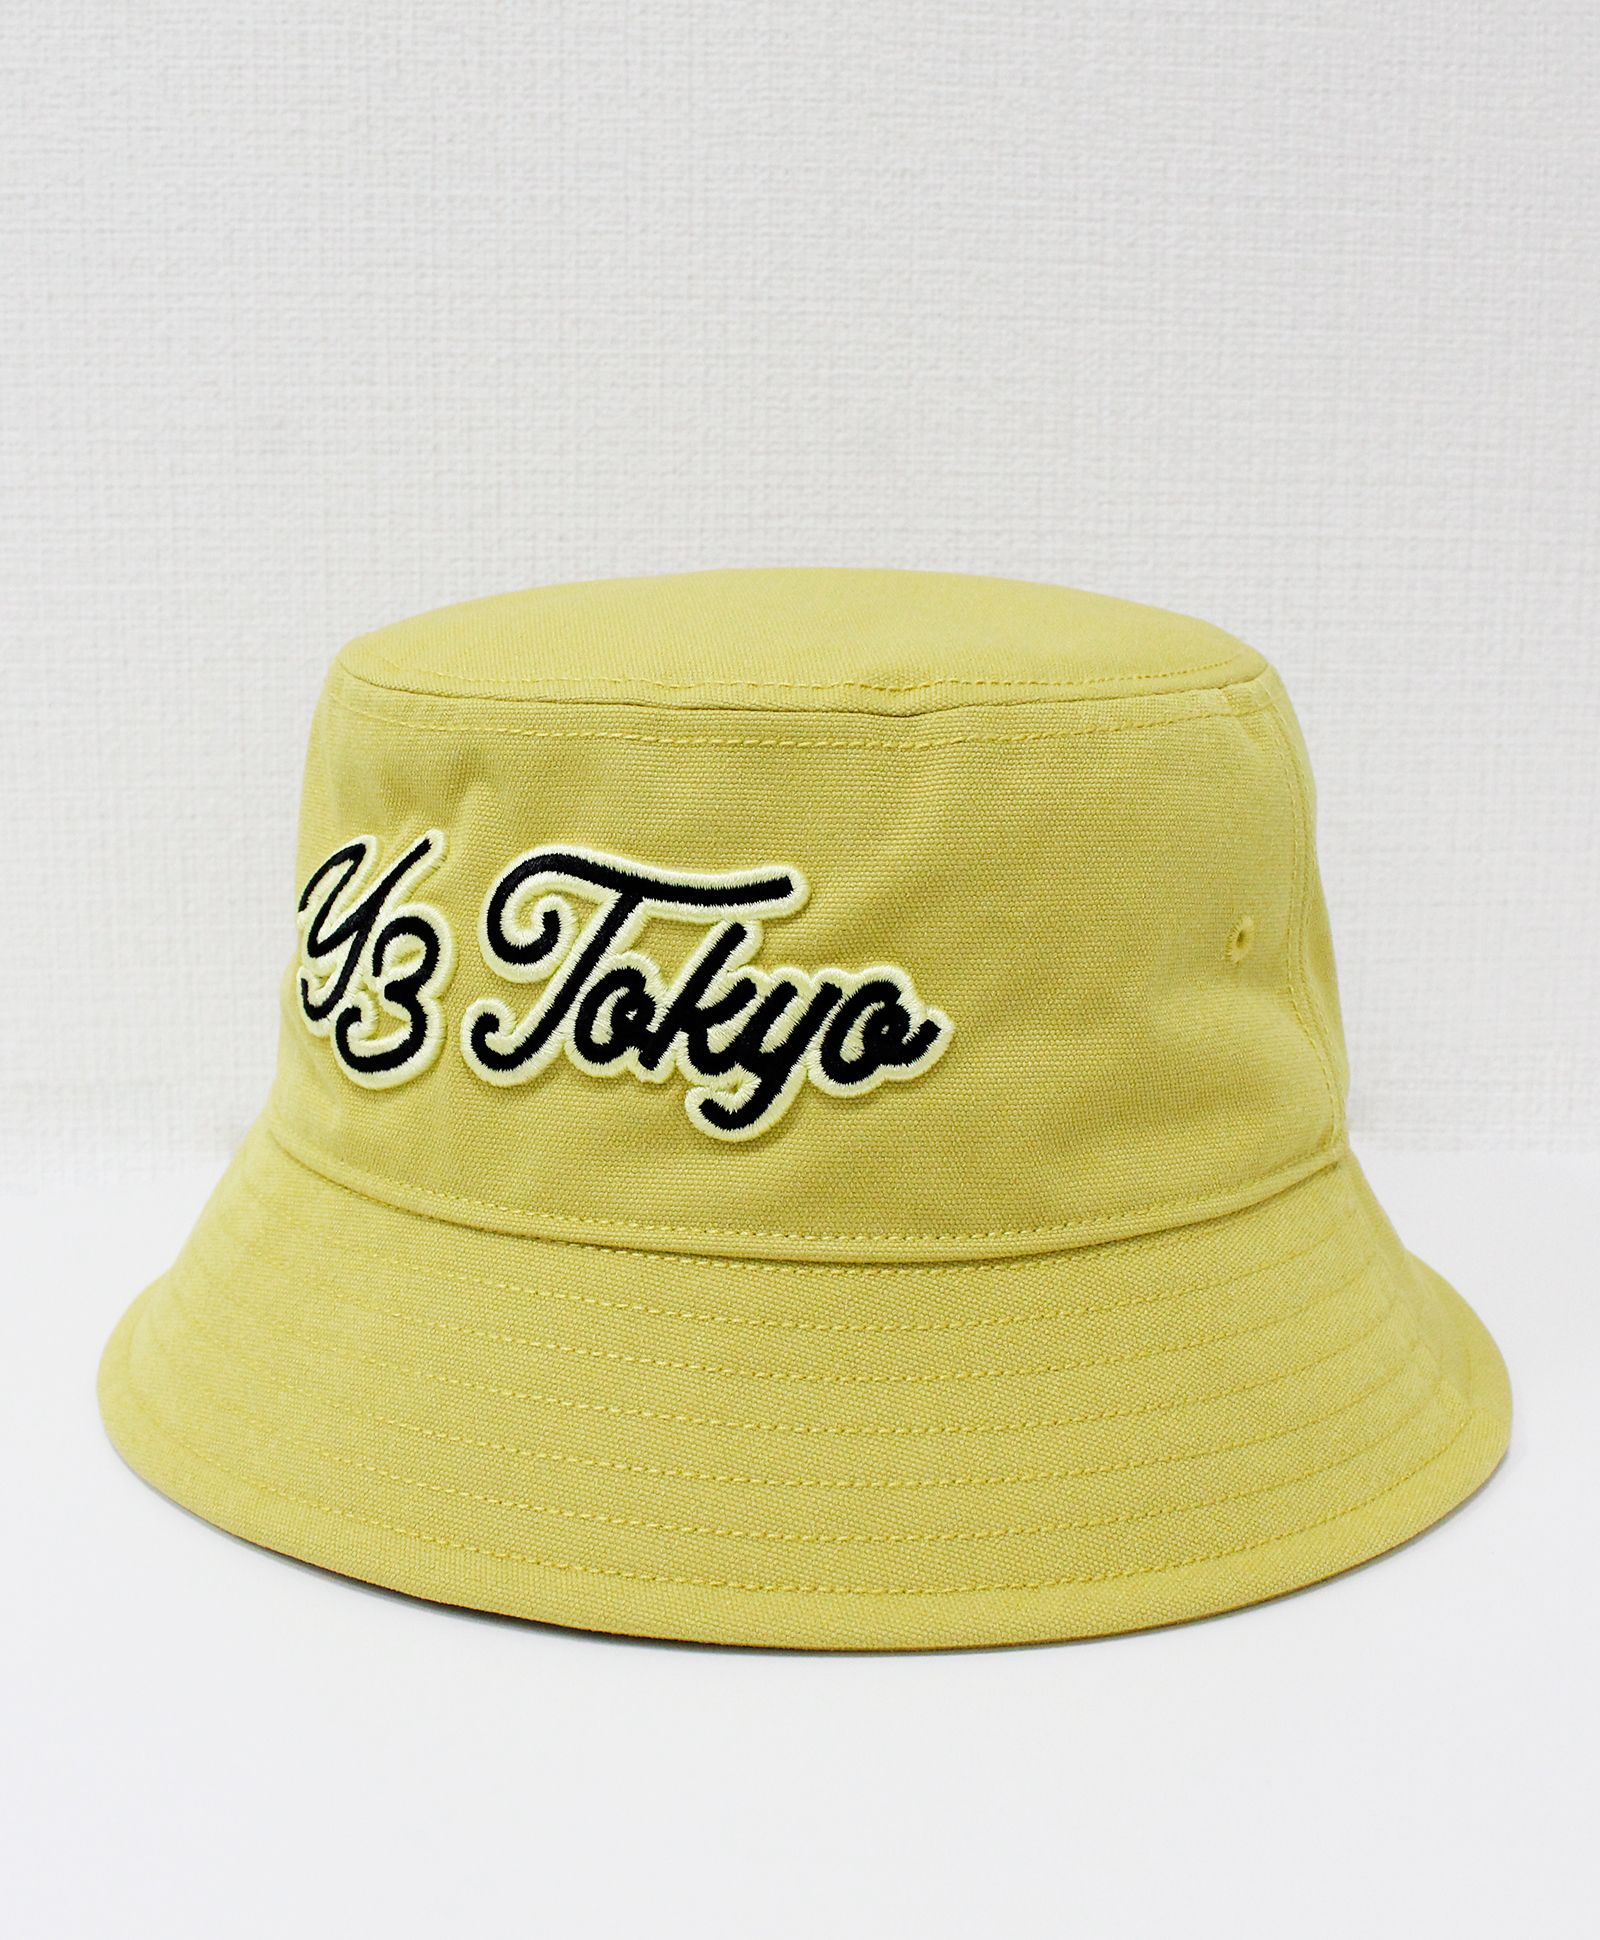 Y-3 - バケットハット / Y-3 T B HAT / BLANCH YELLOW [IT7792-ACCA23